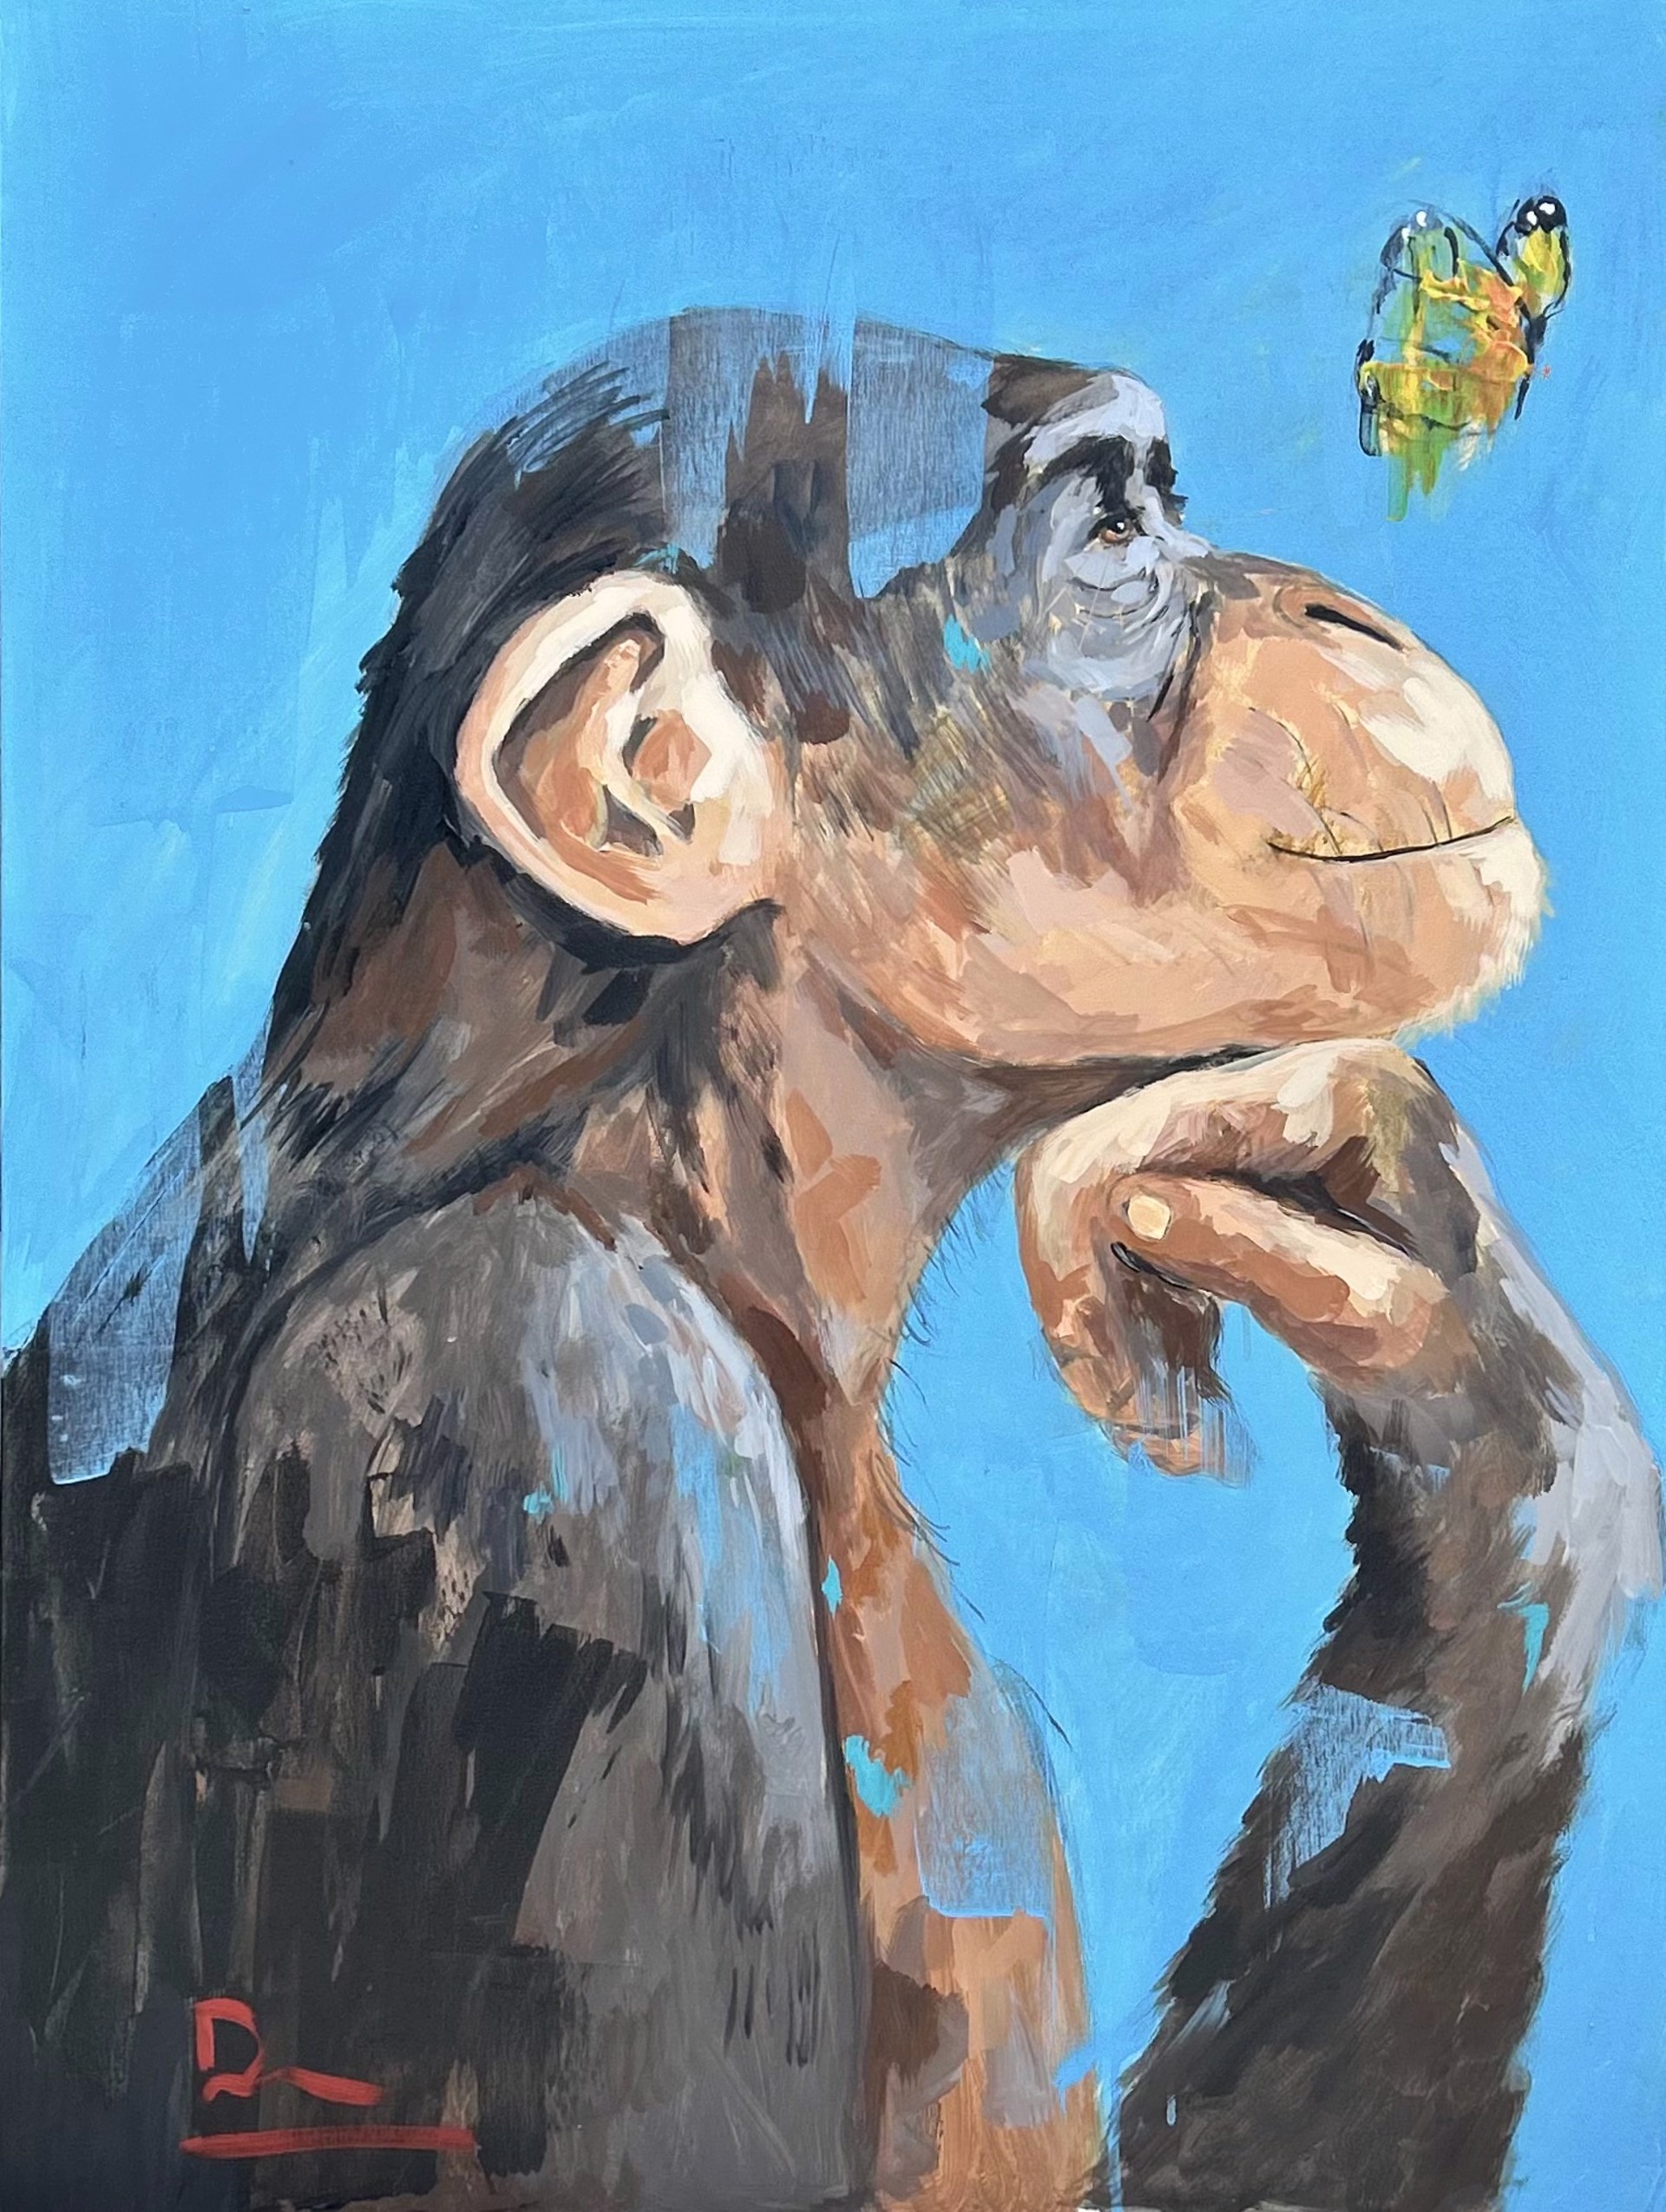 The Monkey and the Butterfly (Made for David Hersh's "FUNA") by Dominic Mattioli